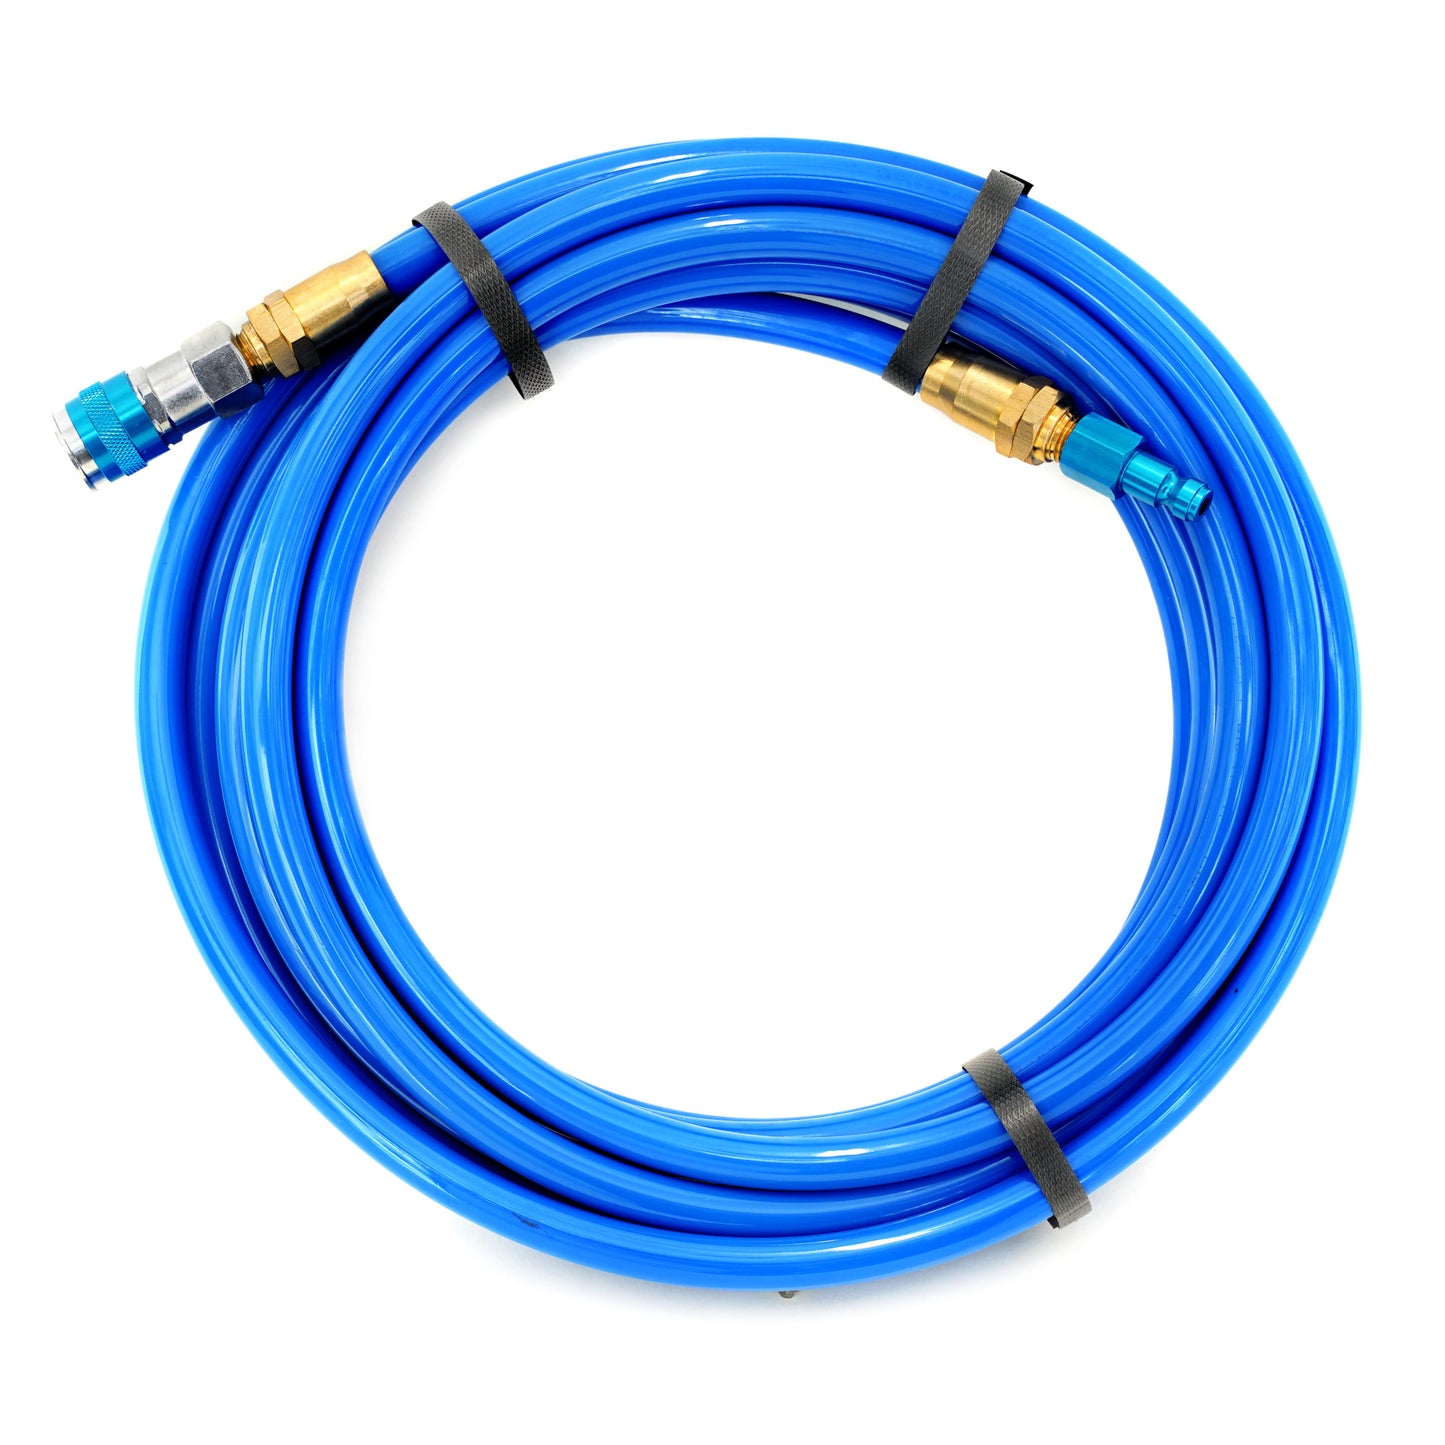 25-foot 3/8-inch ID Air Hose with Reuseable 1/4-inch NPT Brass and Quick Connect Fittings